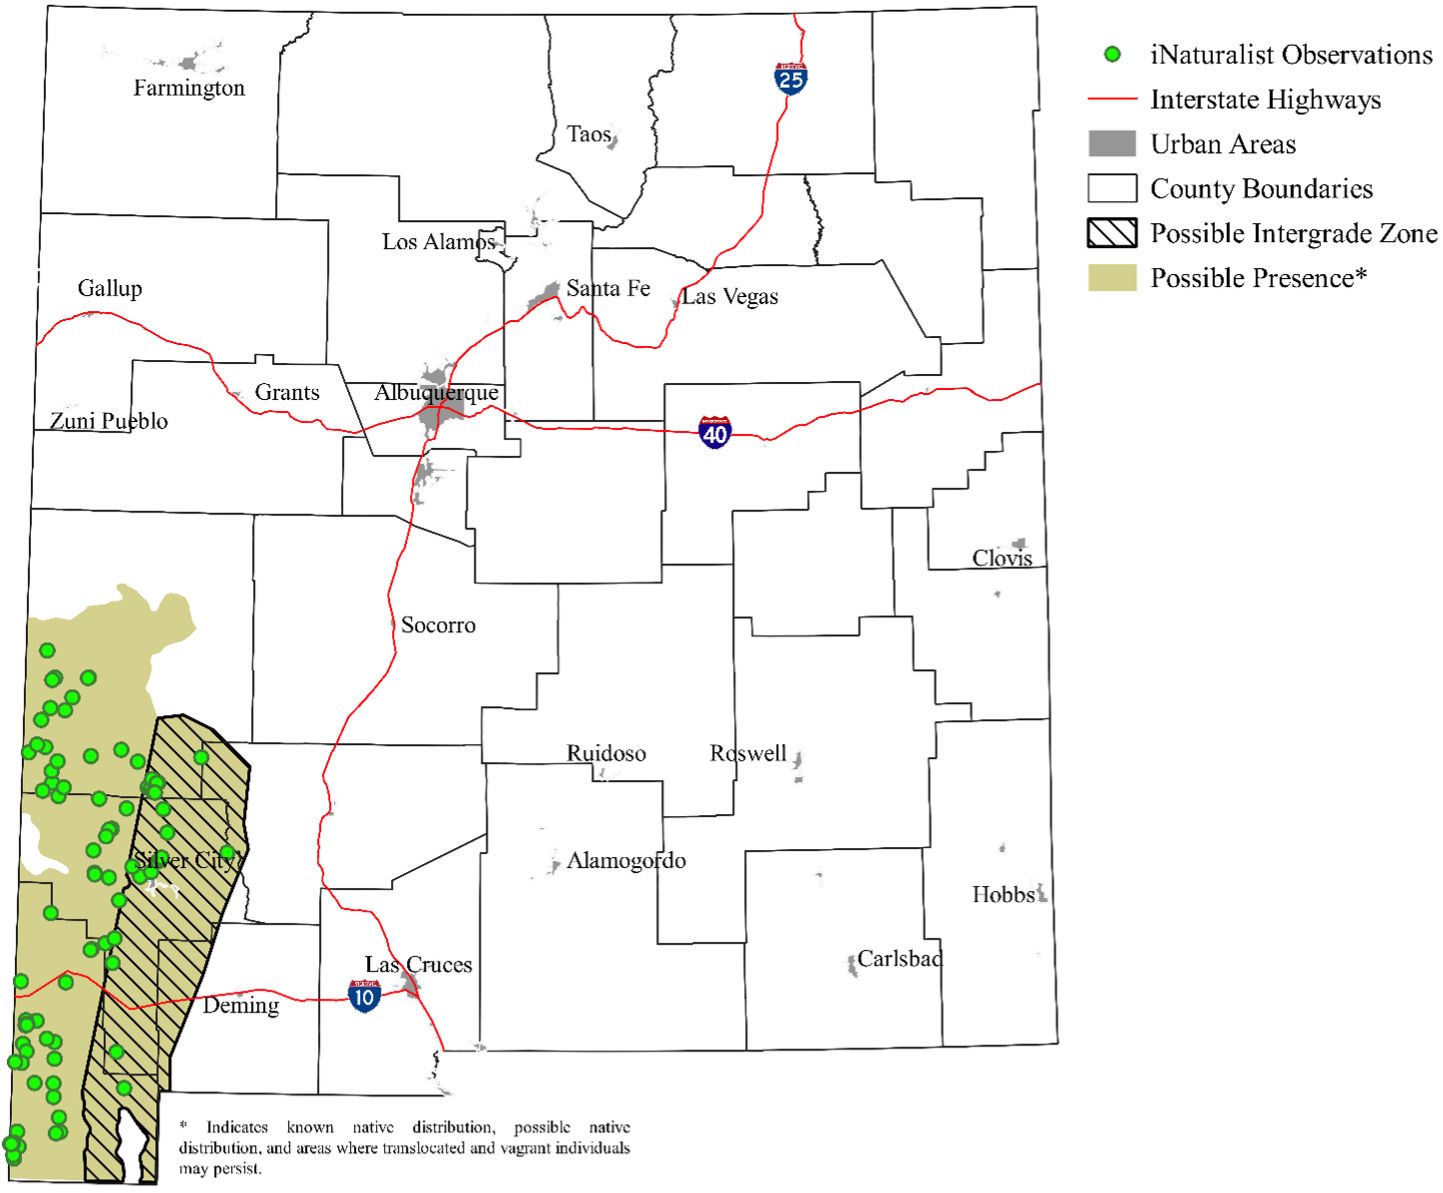 Observations and projected distribution of the northern black-tailed rattlesnake in New Mexico. The possible intergrade zone in southwestern New Mexico is an area where the two species of black-tailed rattlesnakes may hybridize. 